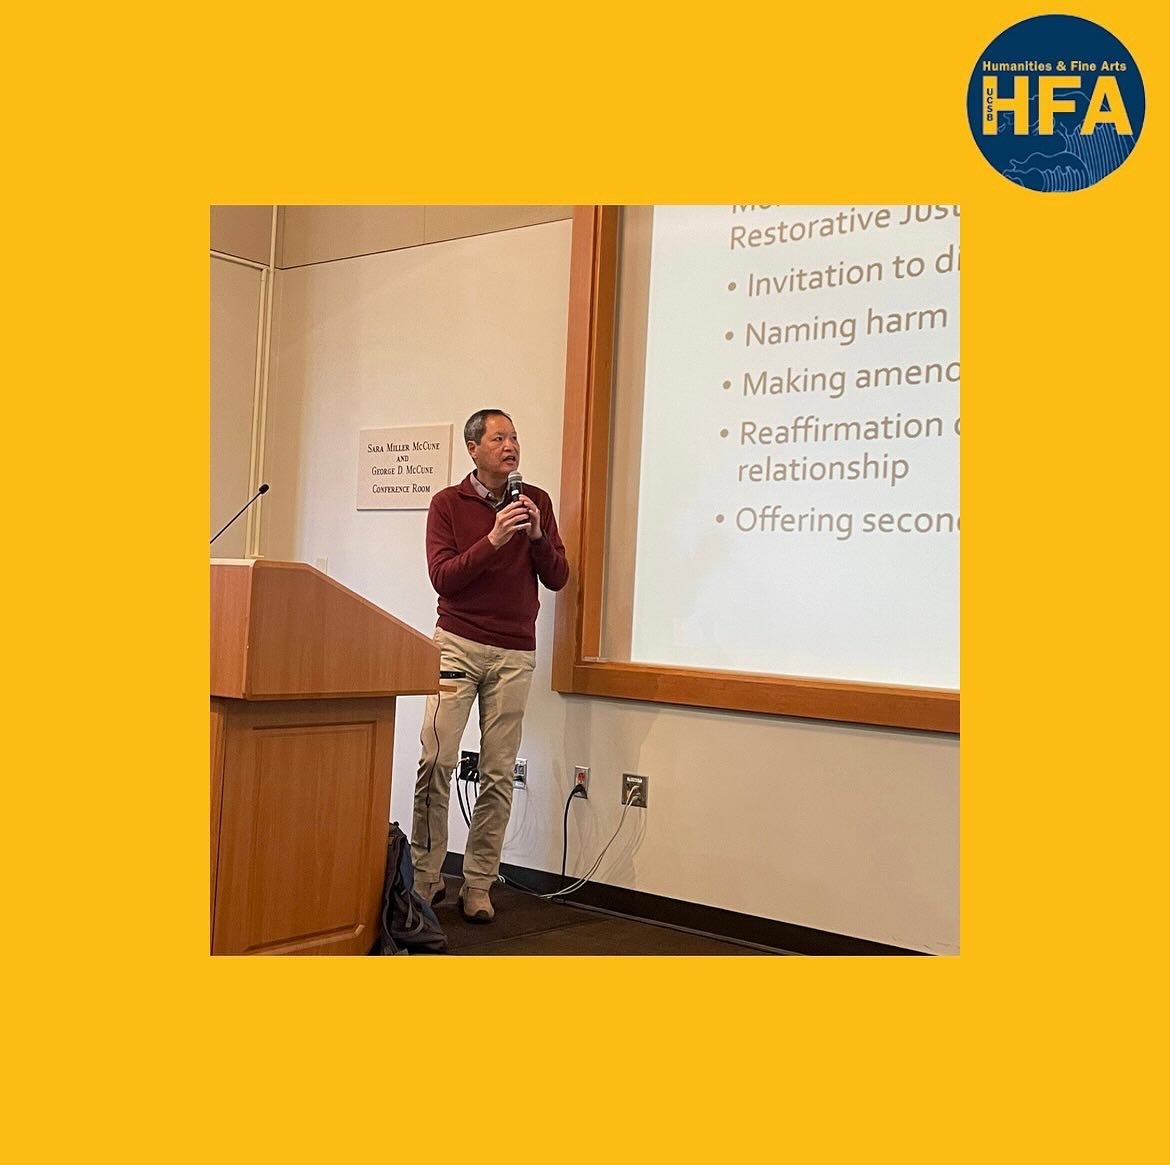 Russell M. Jeung, a professor of Asian American studies at San Francisco State University, spoke at UCSB about the racial violence and hate that rose during the COVID-19 era and how that racial trauma has affected the community&rsquo;s mental health.